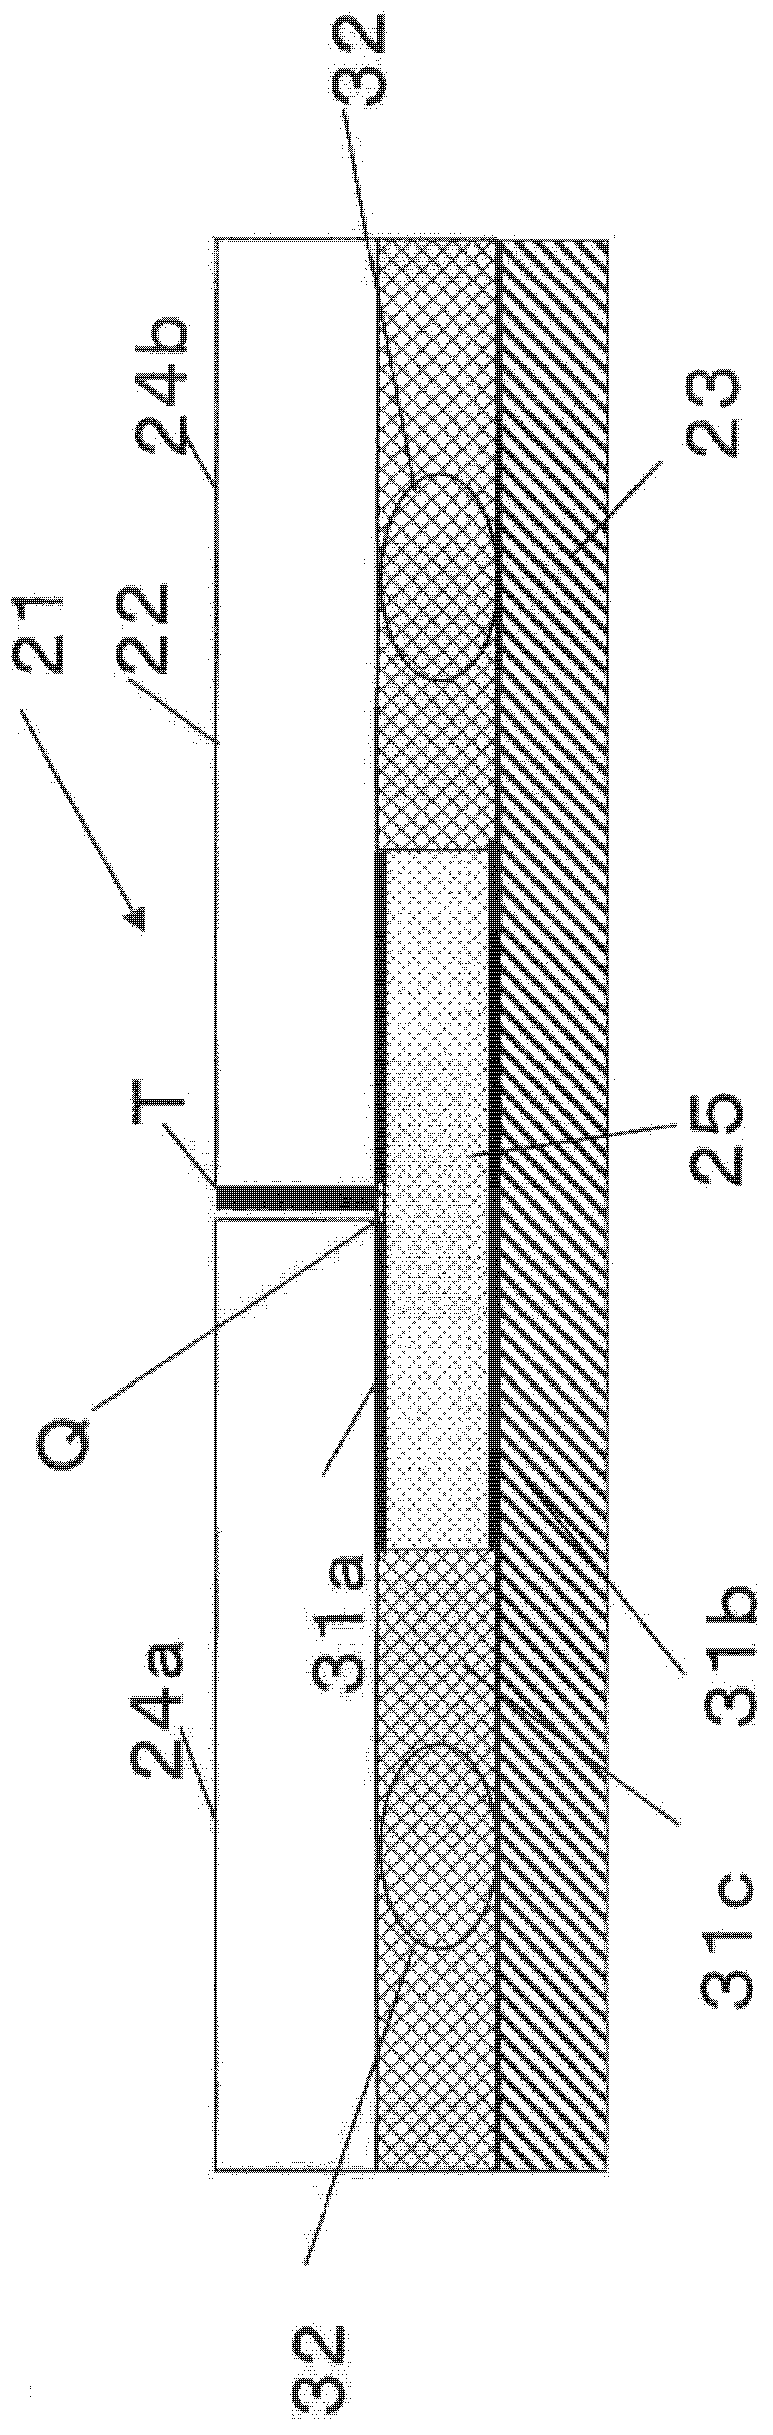 Quality evaluation method of target assembly used in forming thin film for semiconductor layers of thin film transistor